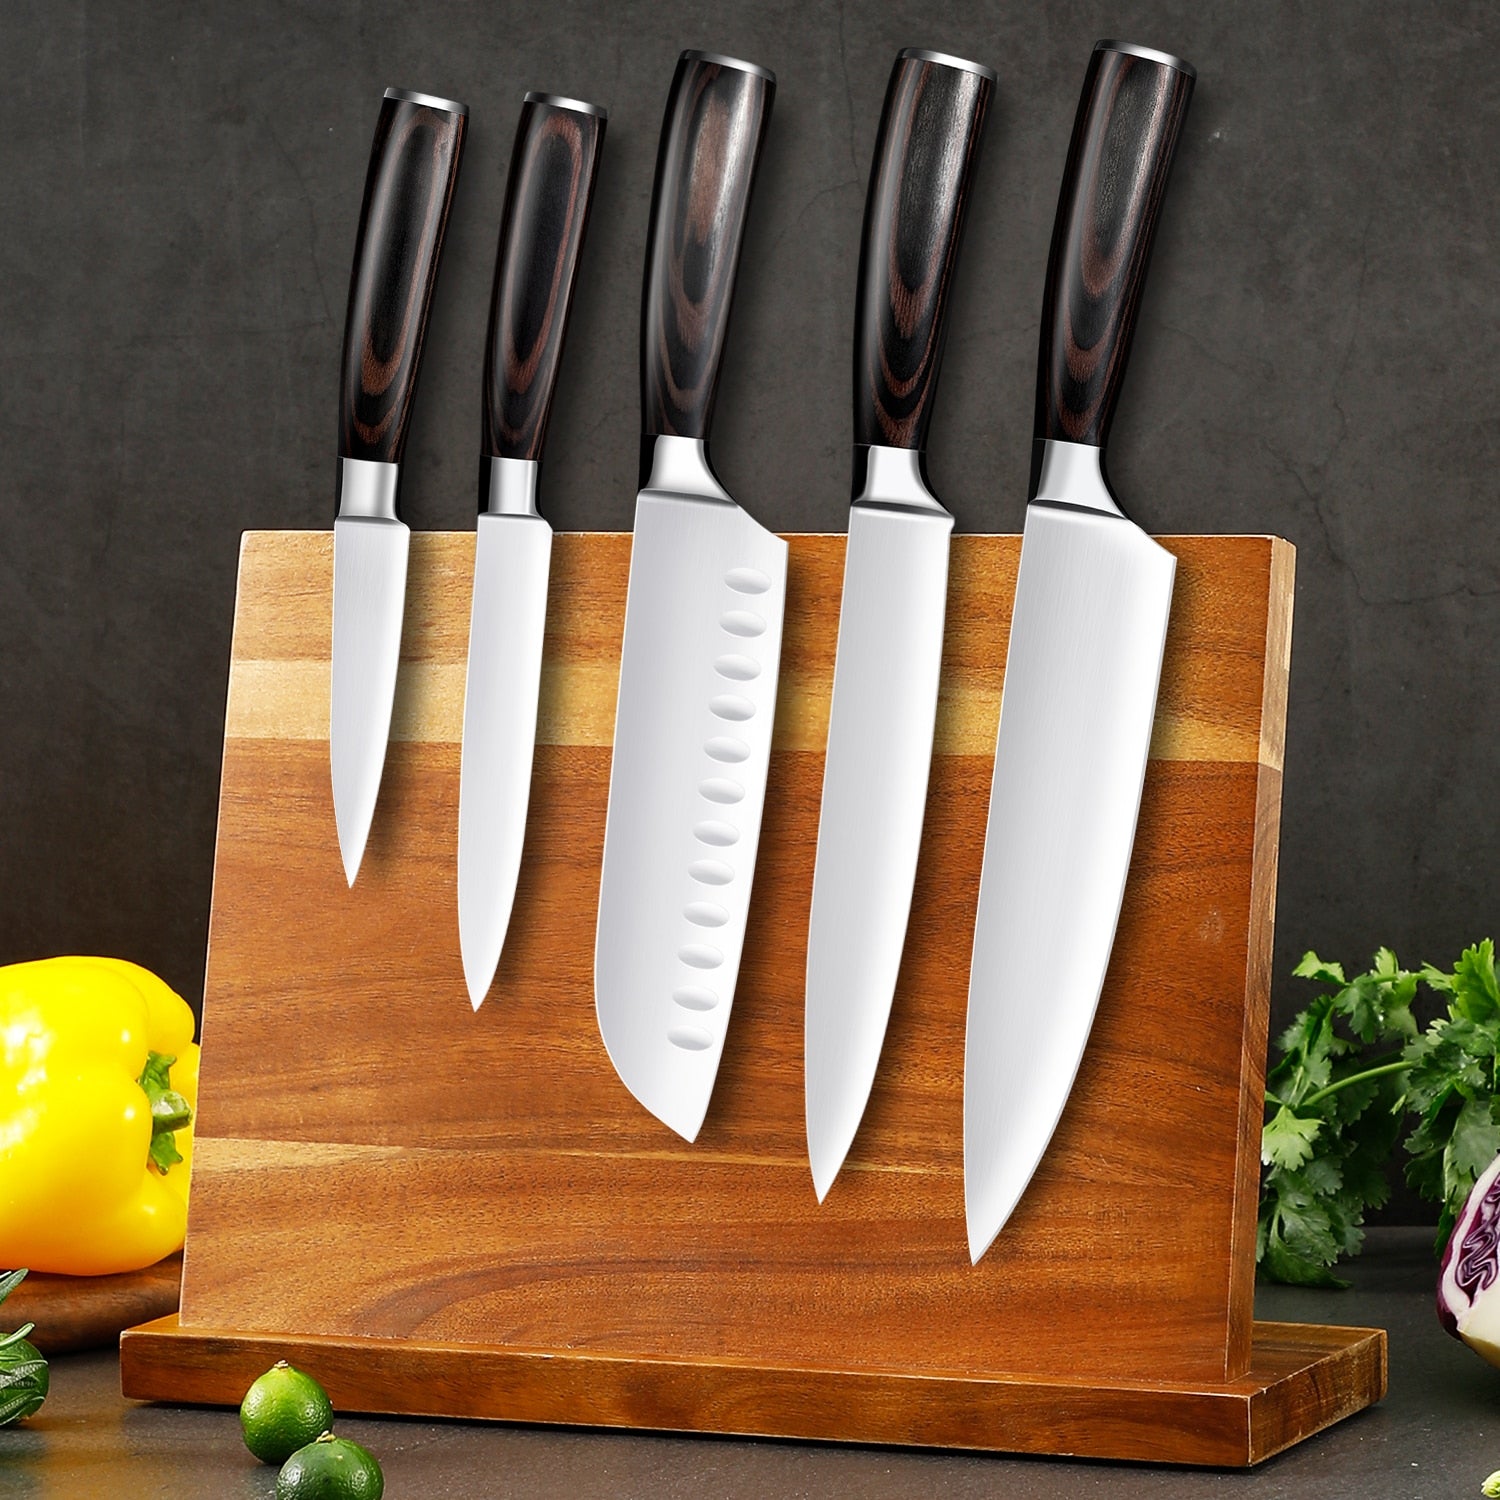 5 Pieces Professional 7CR17 High Carbon Stainless Steel Kitchen